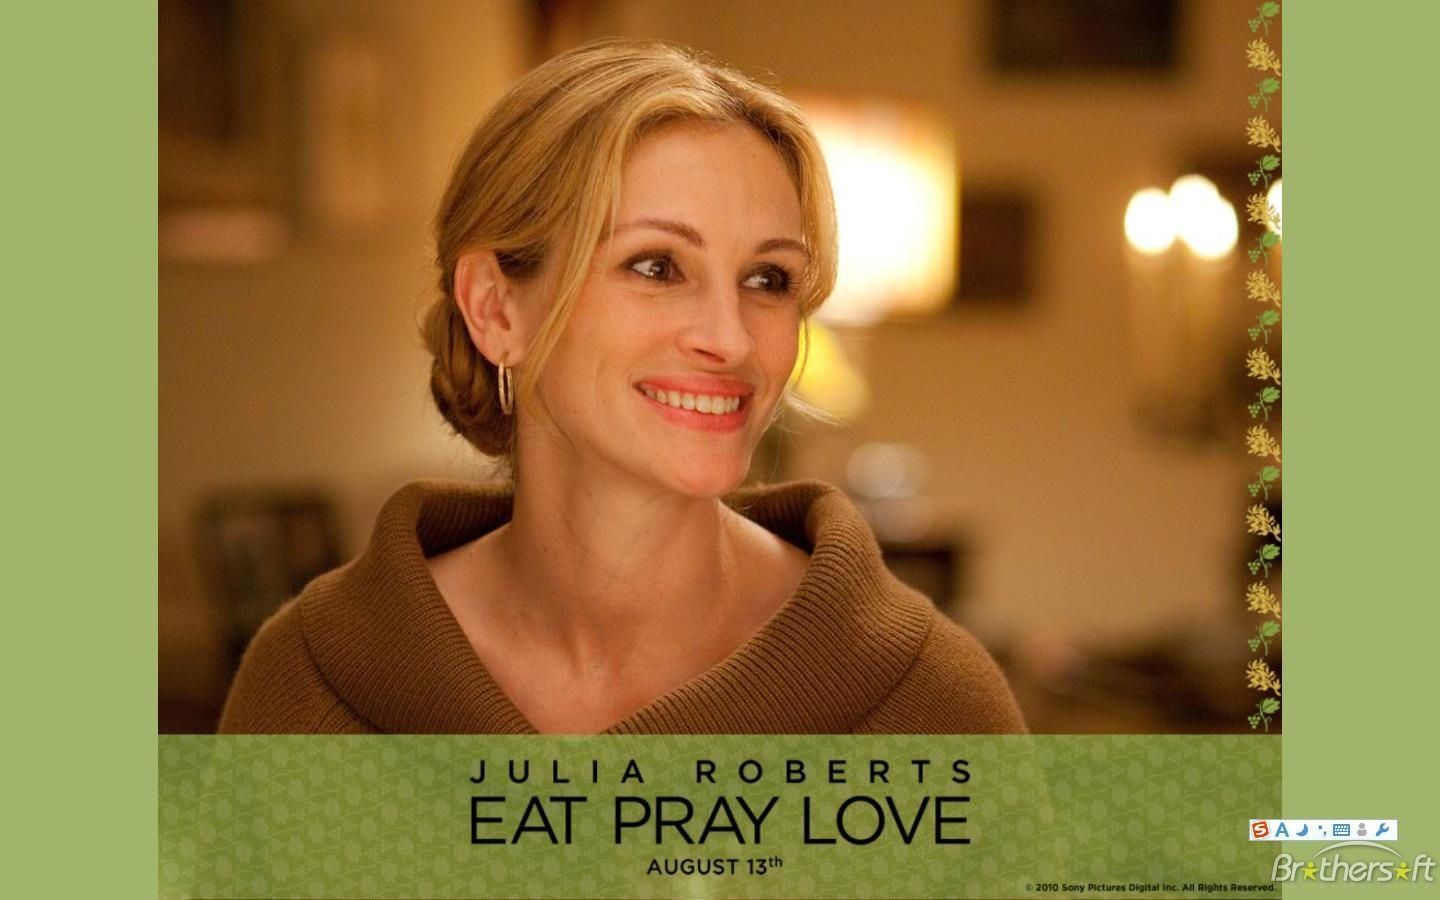 Download Free Eat Pray Love Italy, Eat Pray Love Italy Download